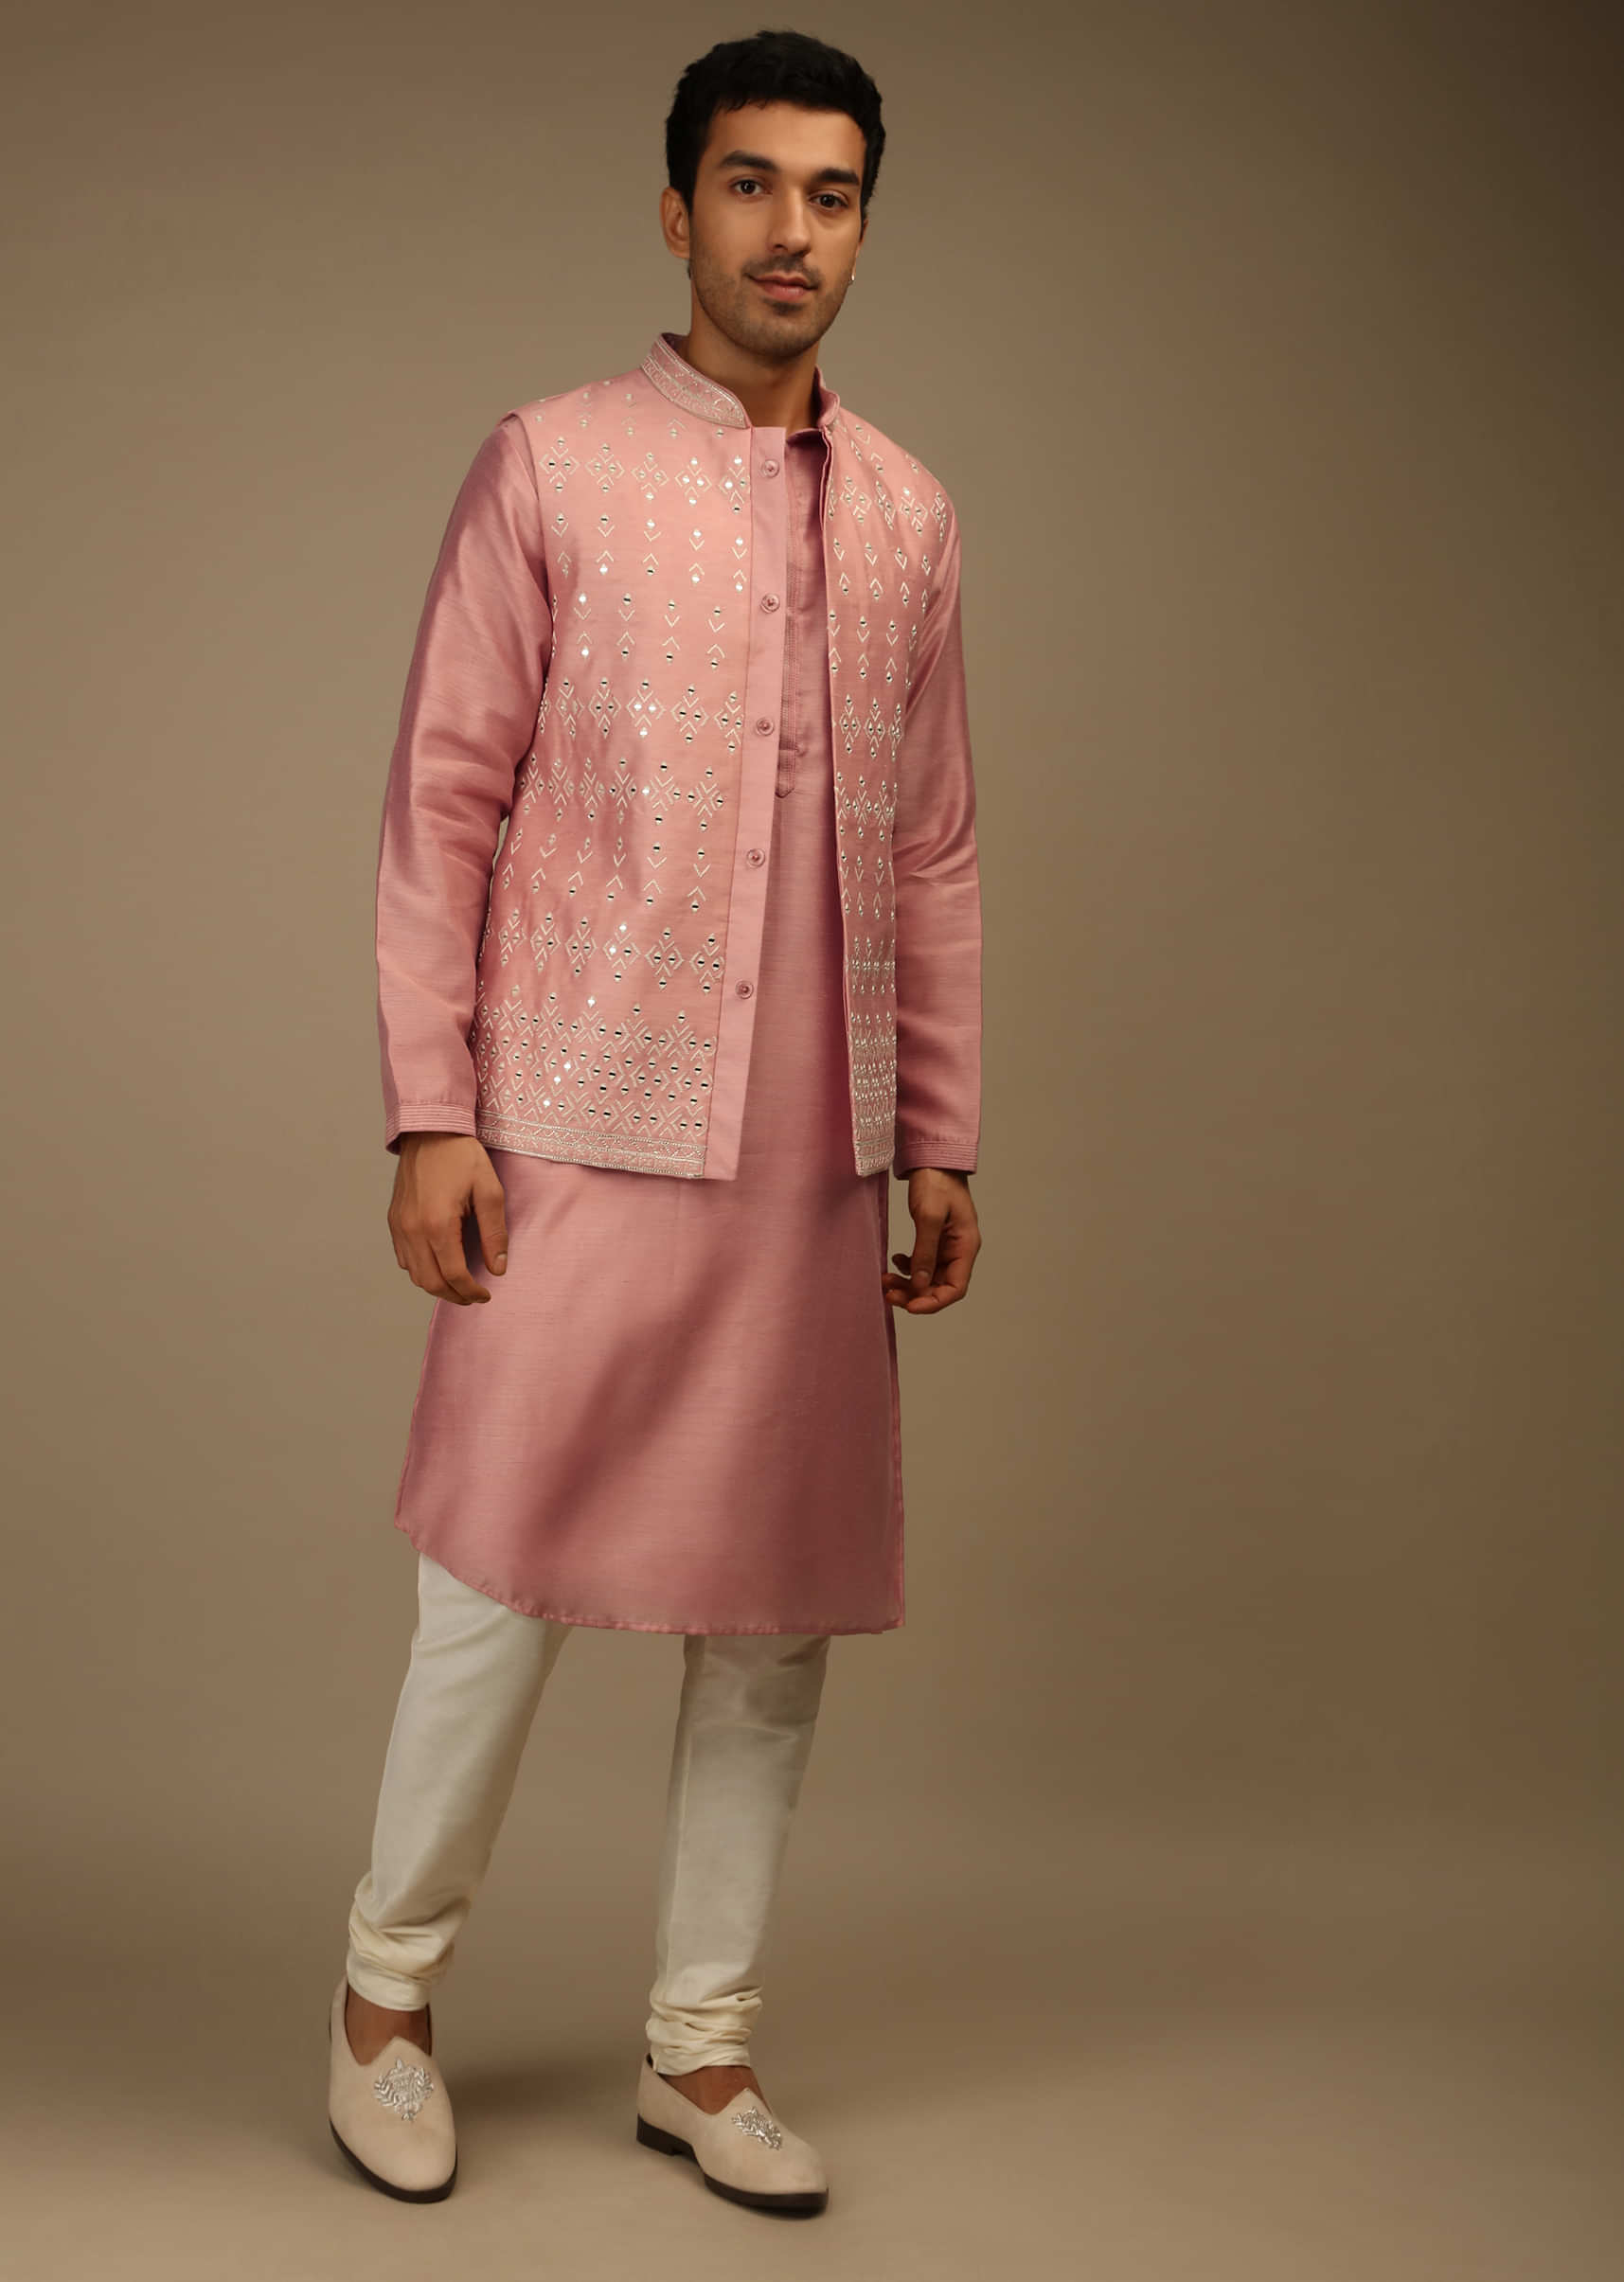 Rose Pink Nehru Jacket And Kurta Set In Tussar Silk With Resham And Sequins Abla Embroidered Geometric Design